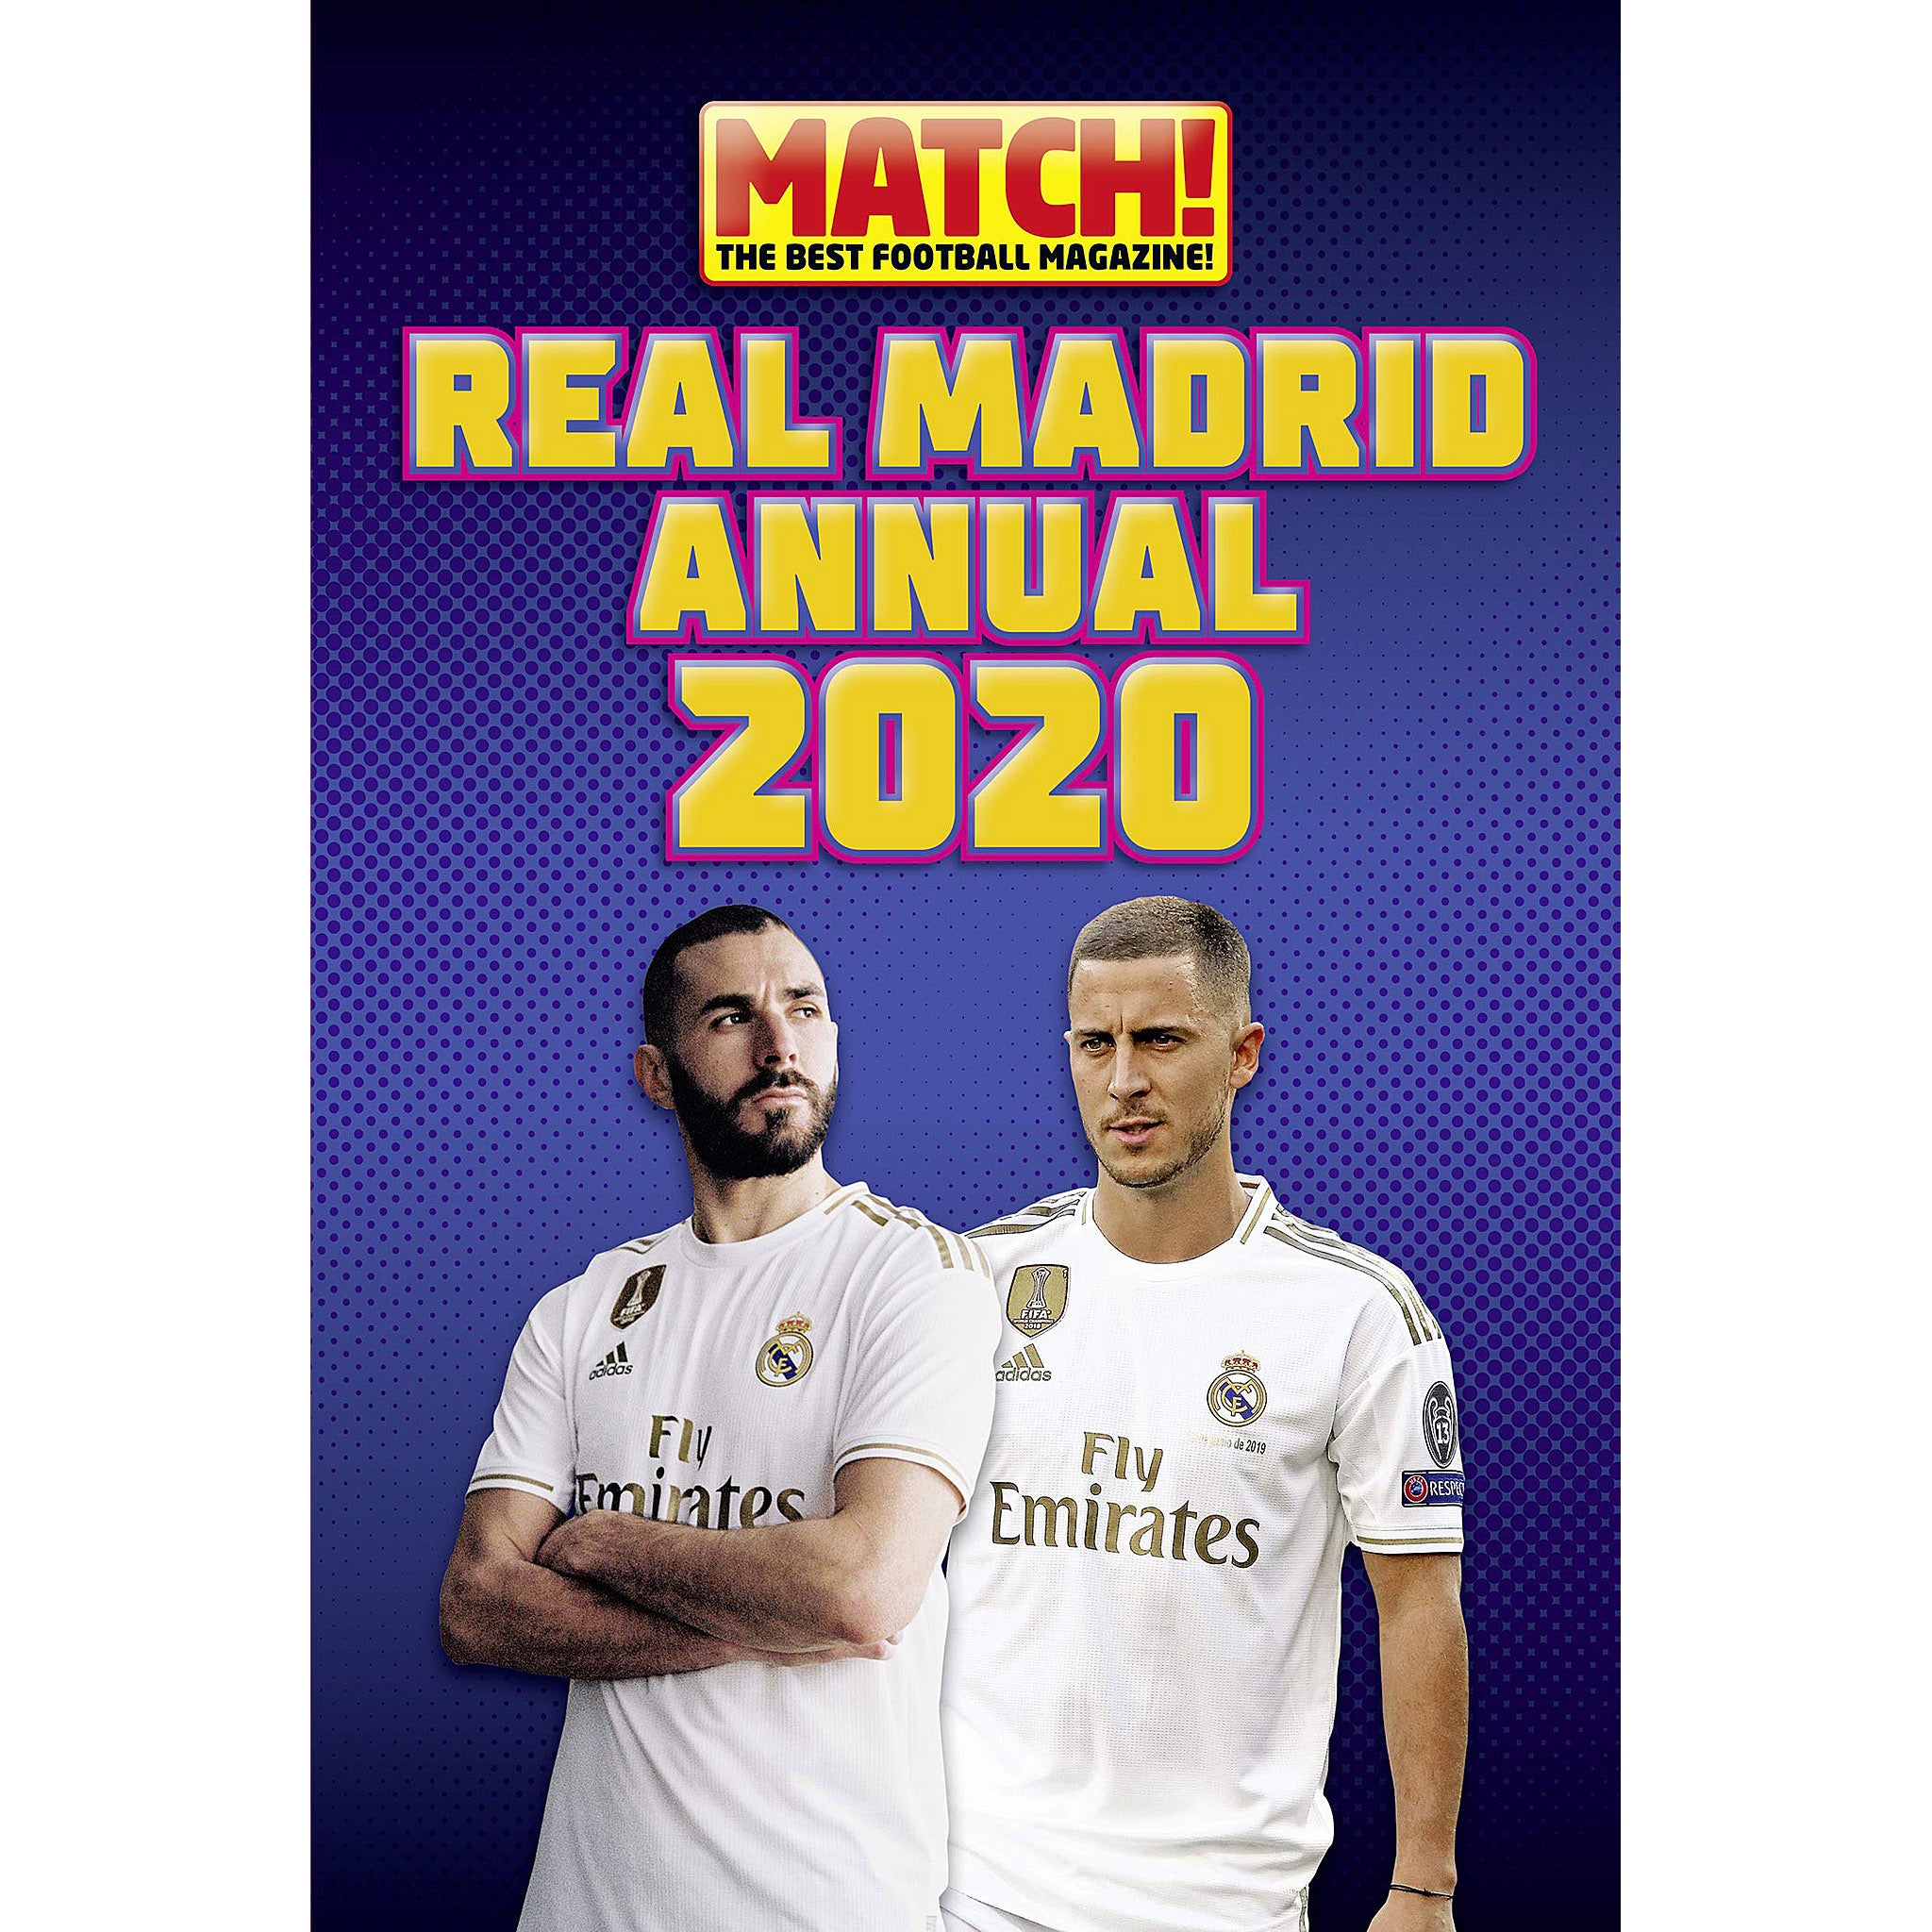 Match Real Madrid Annual 2020